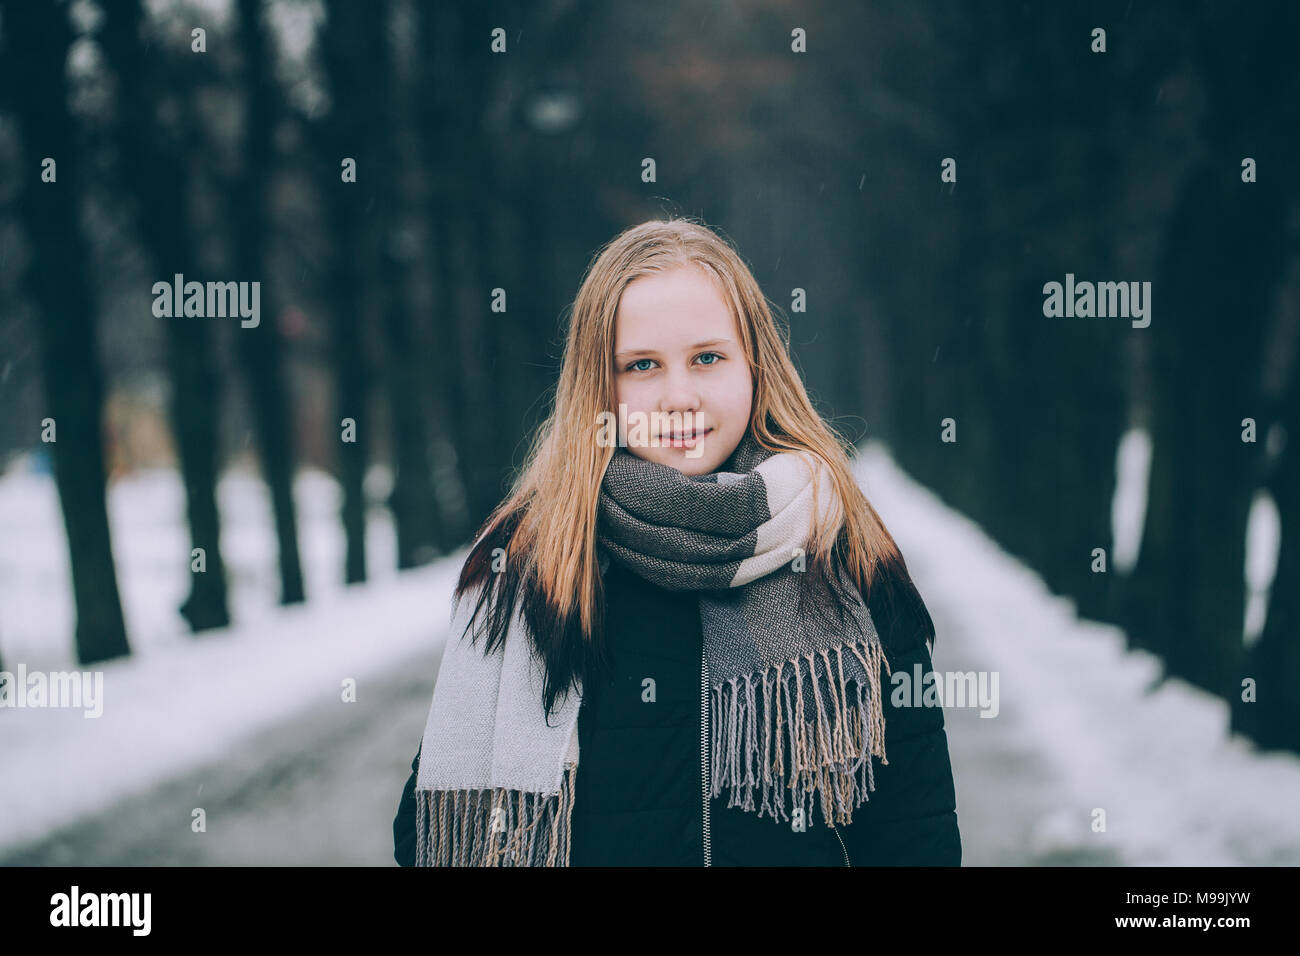 Winter Portrait of Cute Girl Outdoors Stock Photo - Alamy